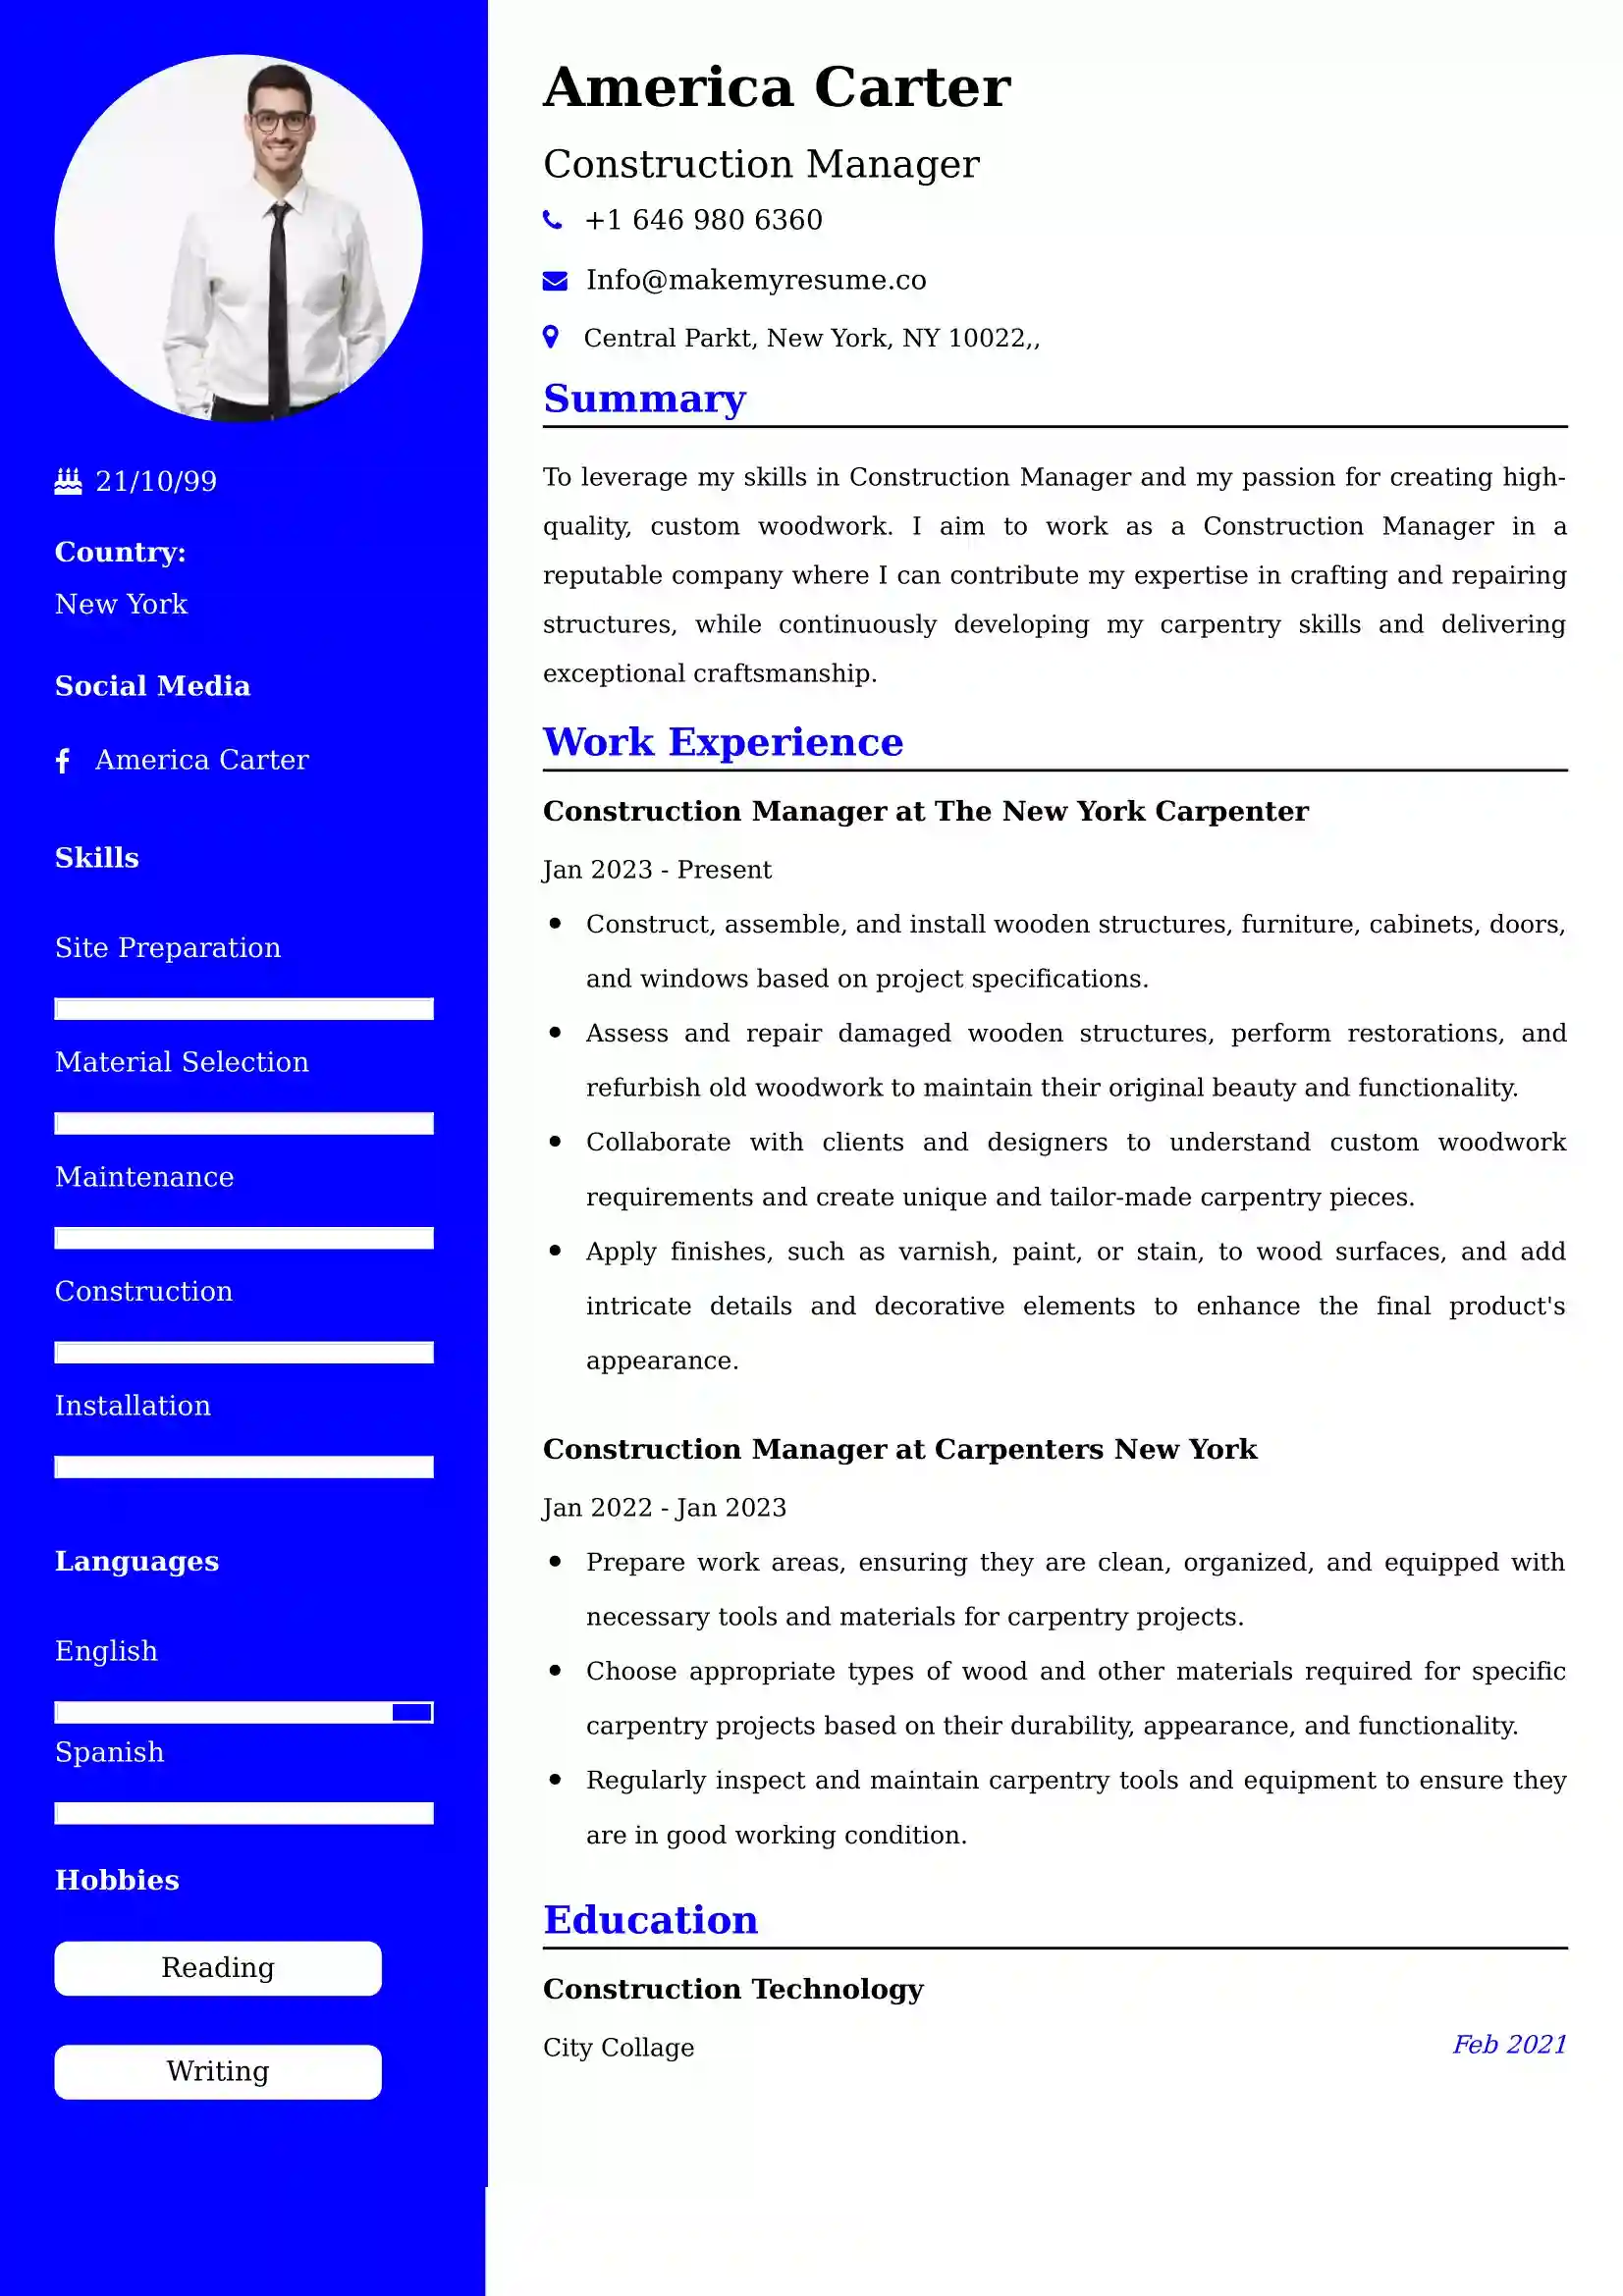 Best Construction Chief Executive Officer Resume Examples for UK